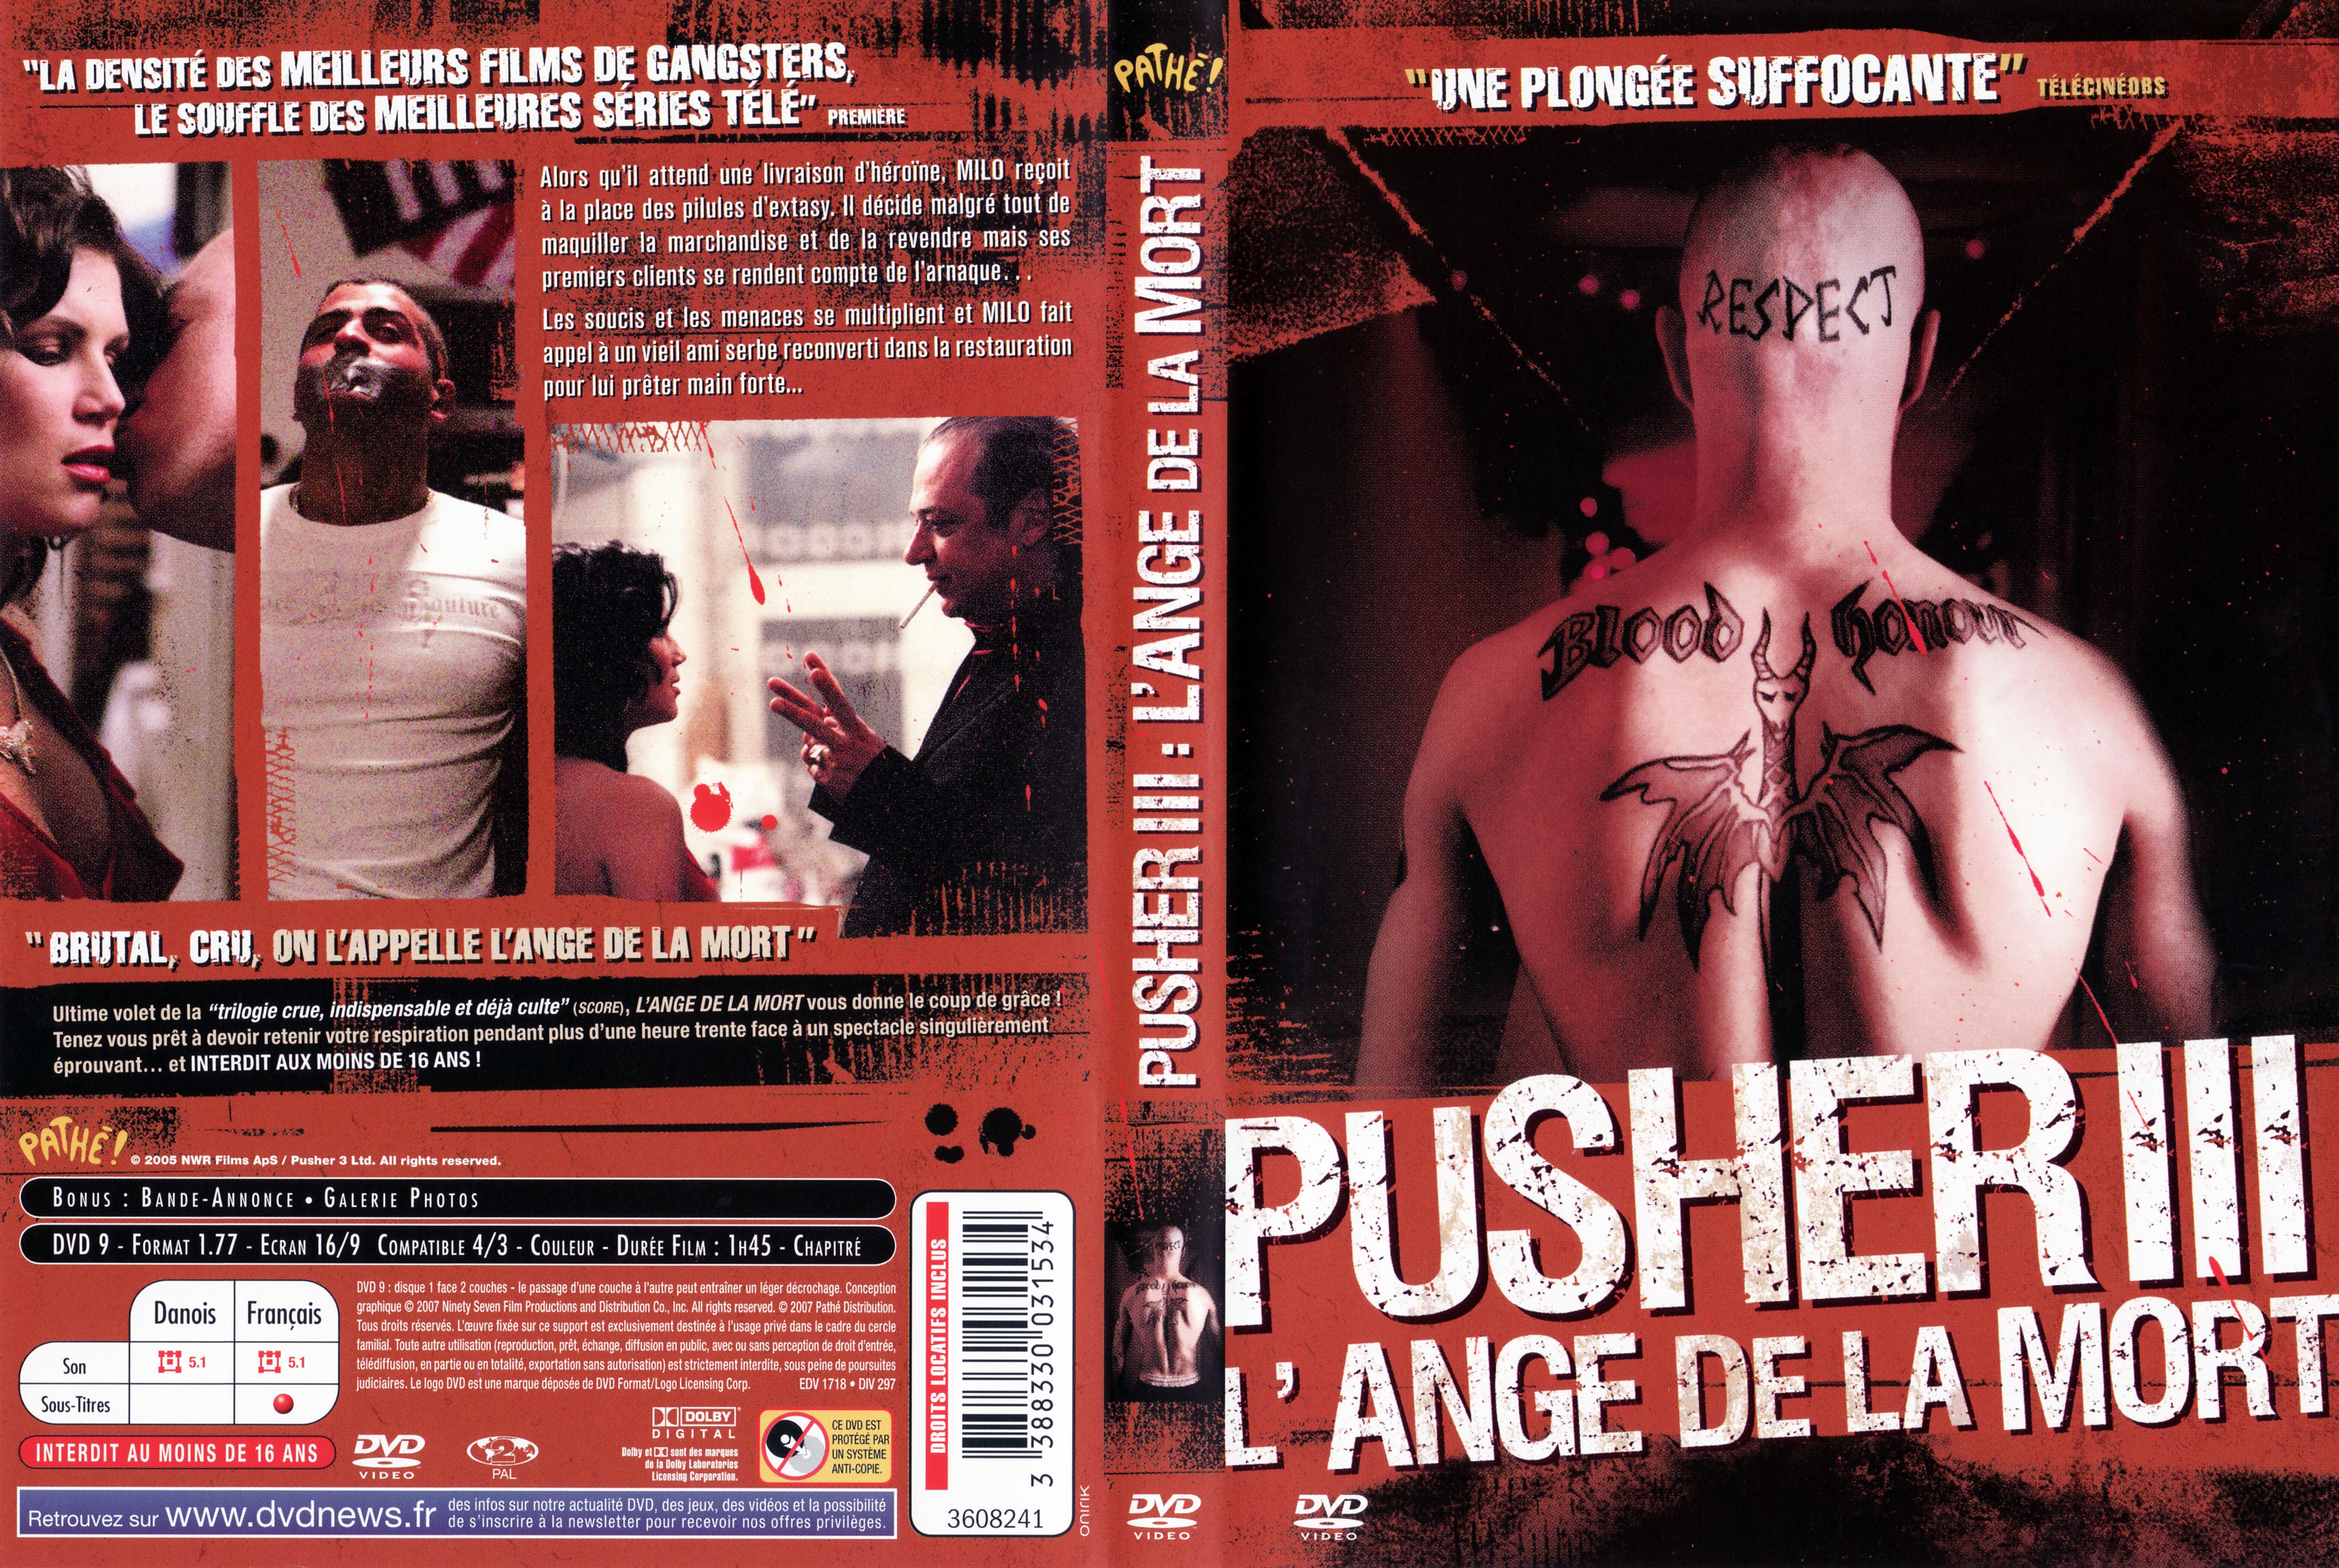 Jaquette DVD Pusher 3